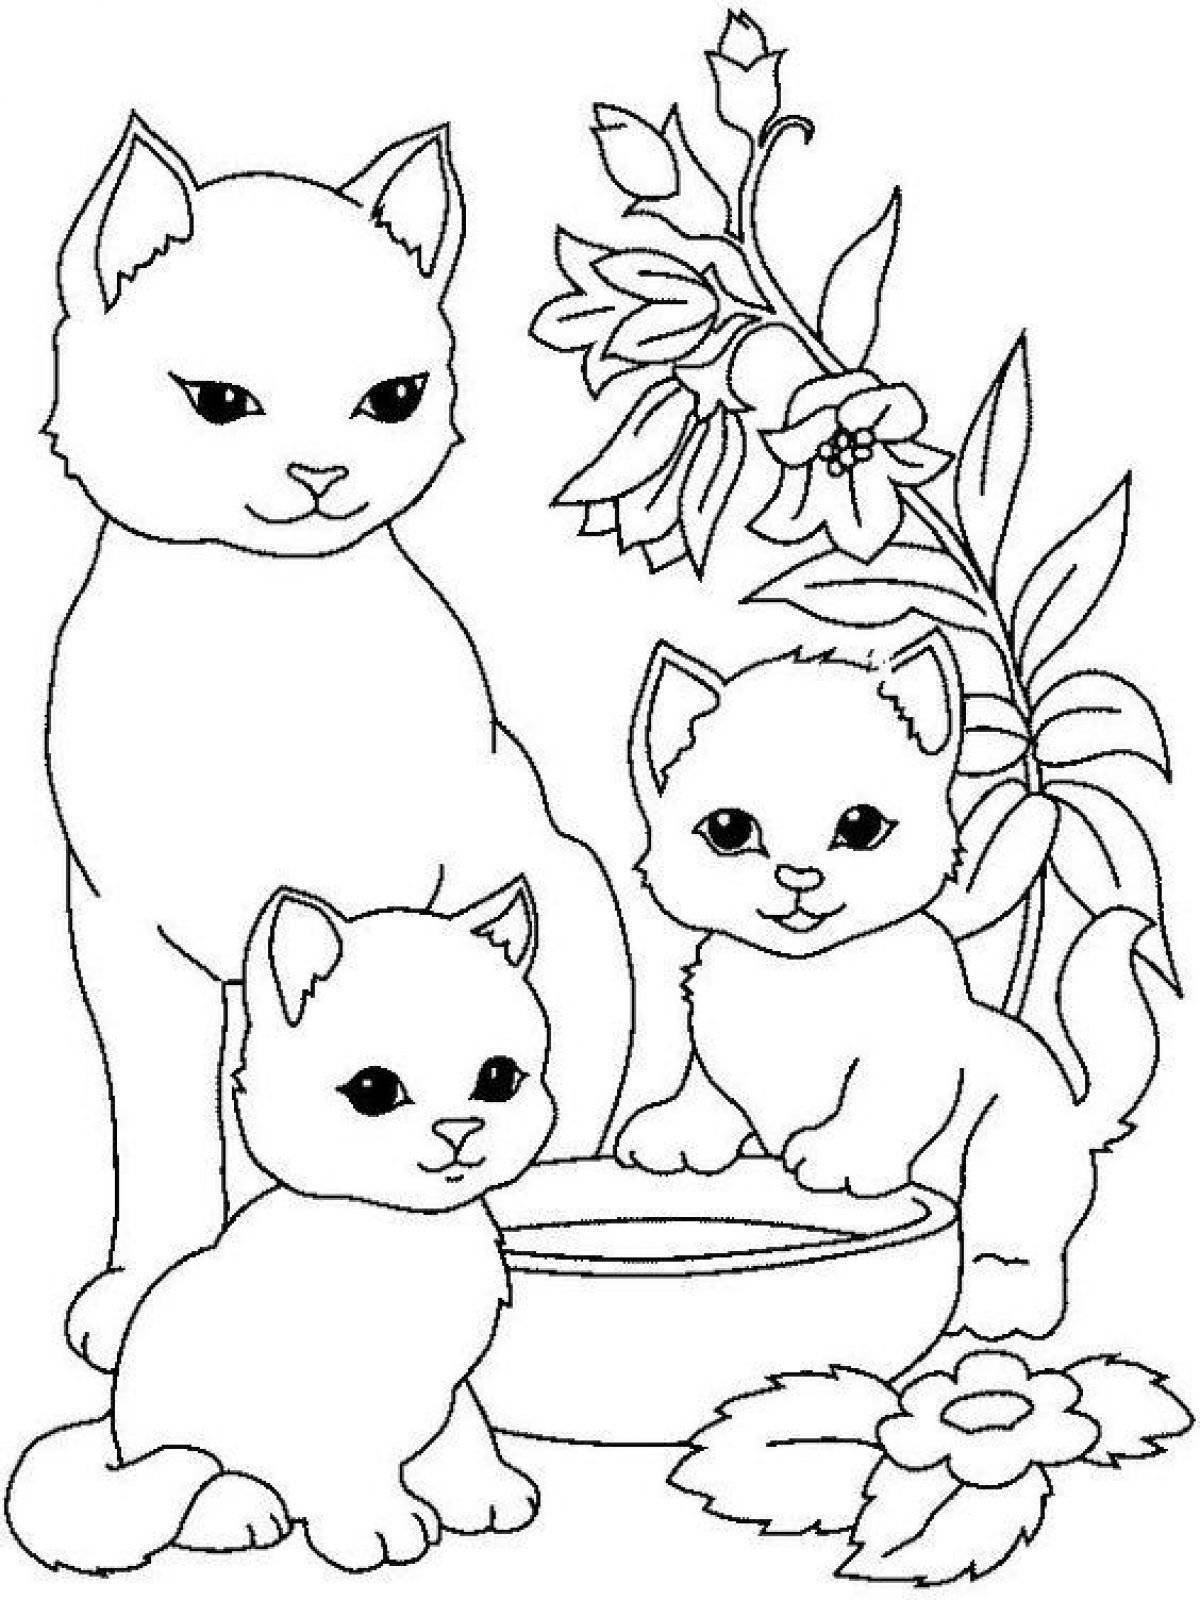 Coloring book inquisitive little kitty